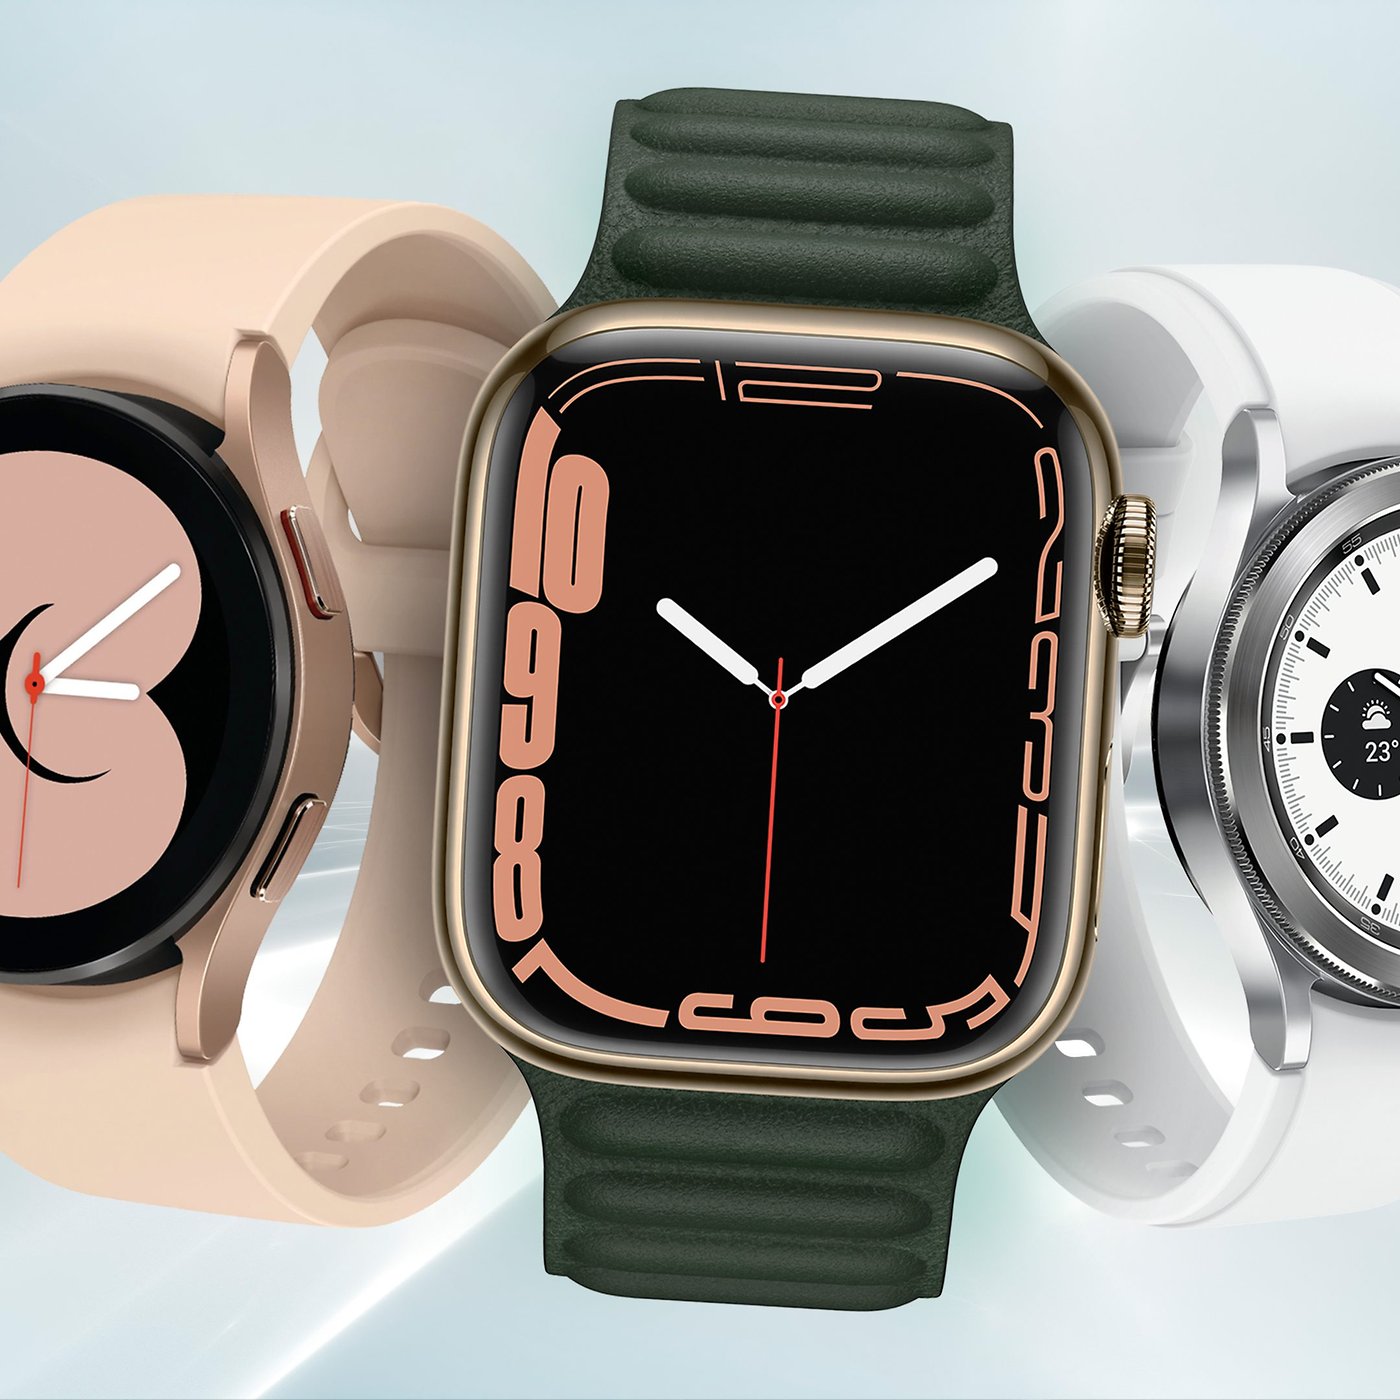 The best Apple and Android smartwatches of 2022 NextPit